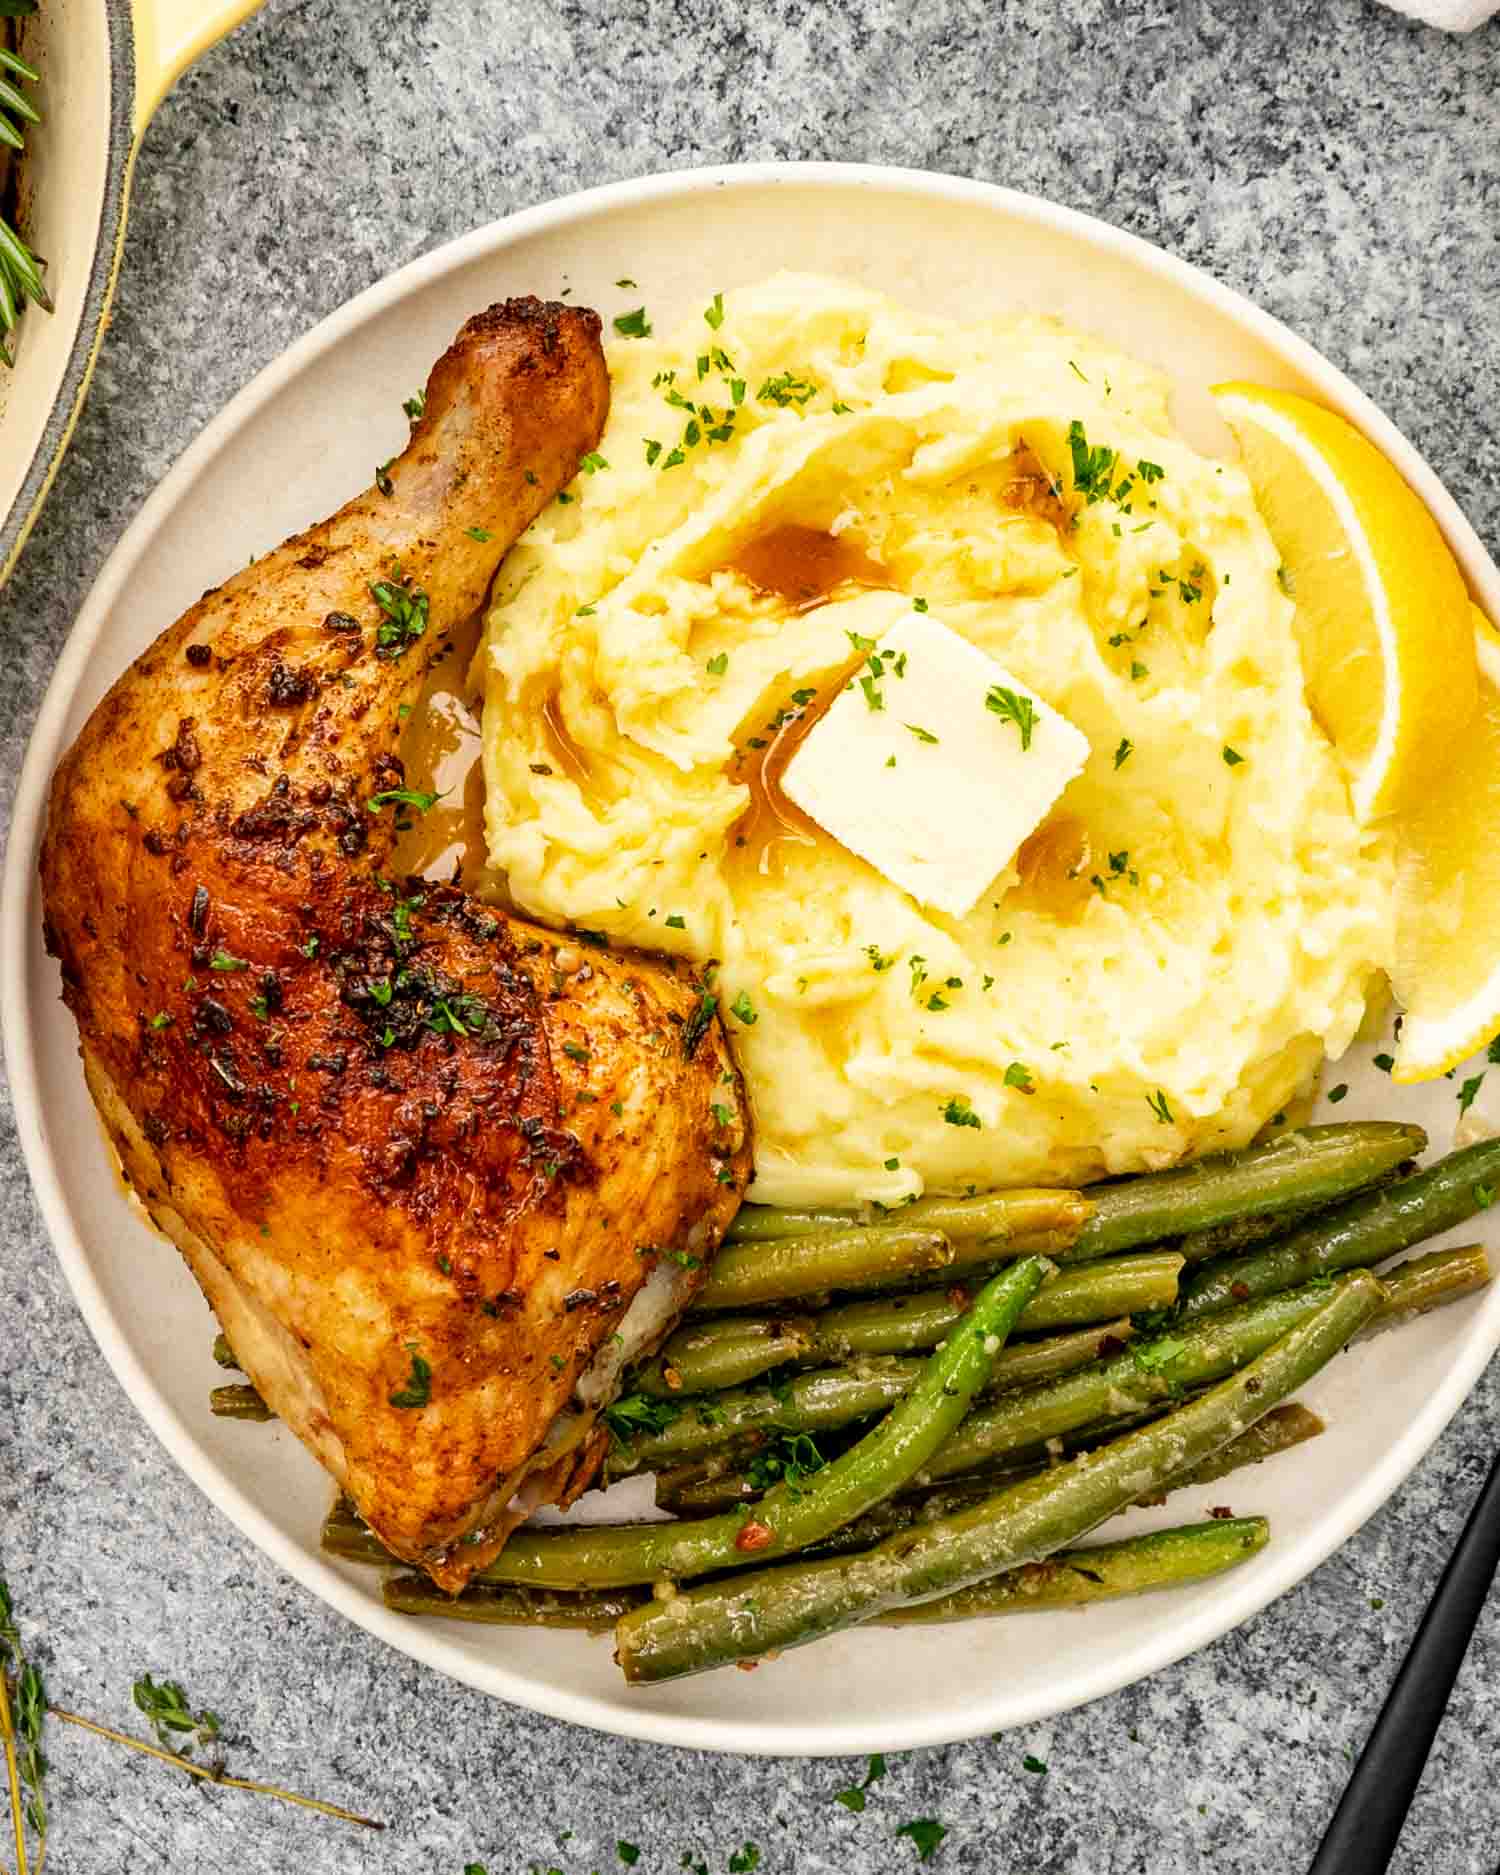 a baked chicken leg on a white plate with a side of mashed potatoes and green beans.